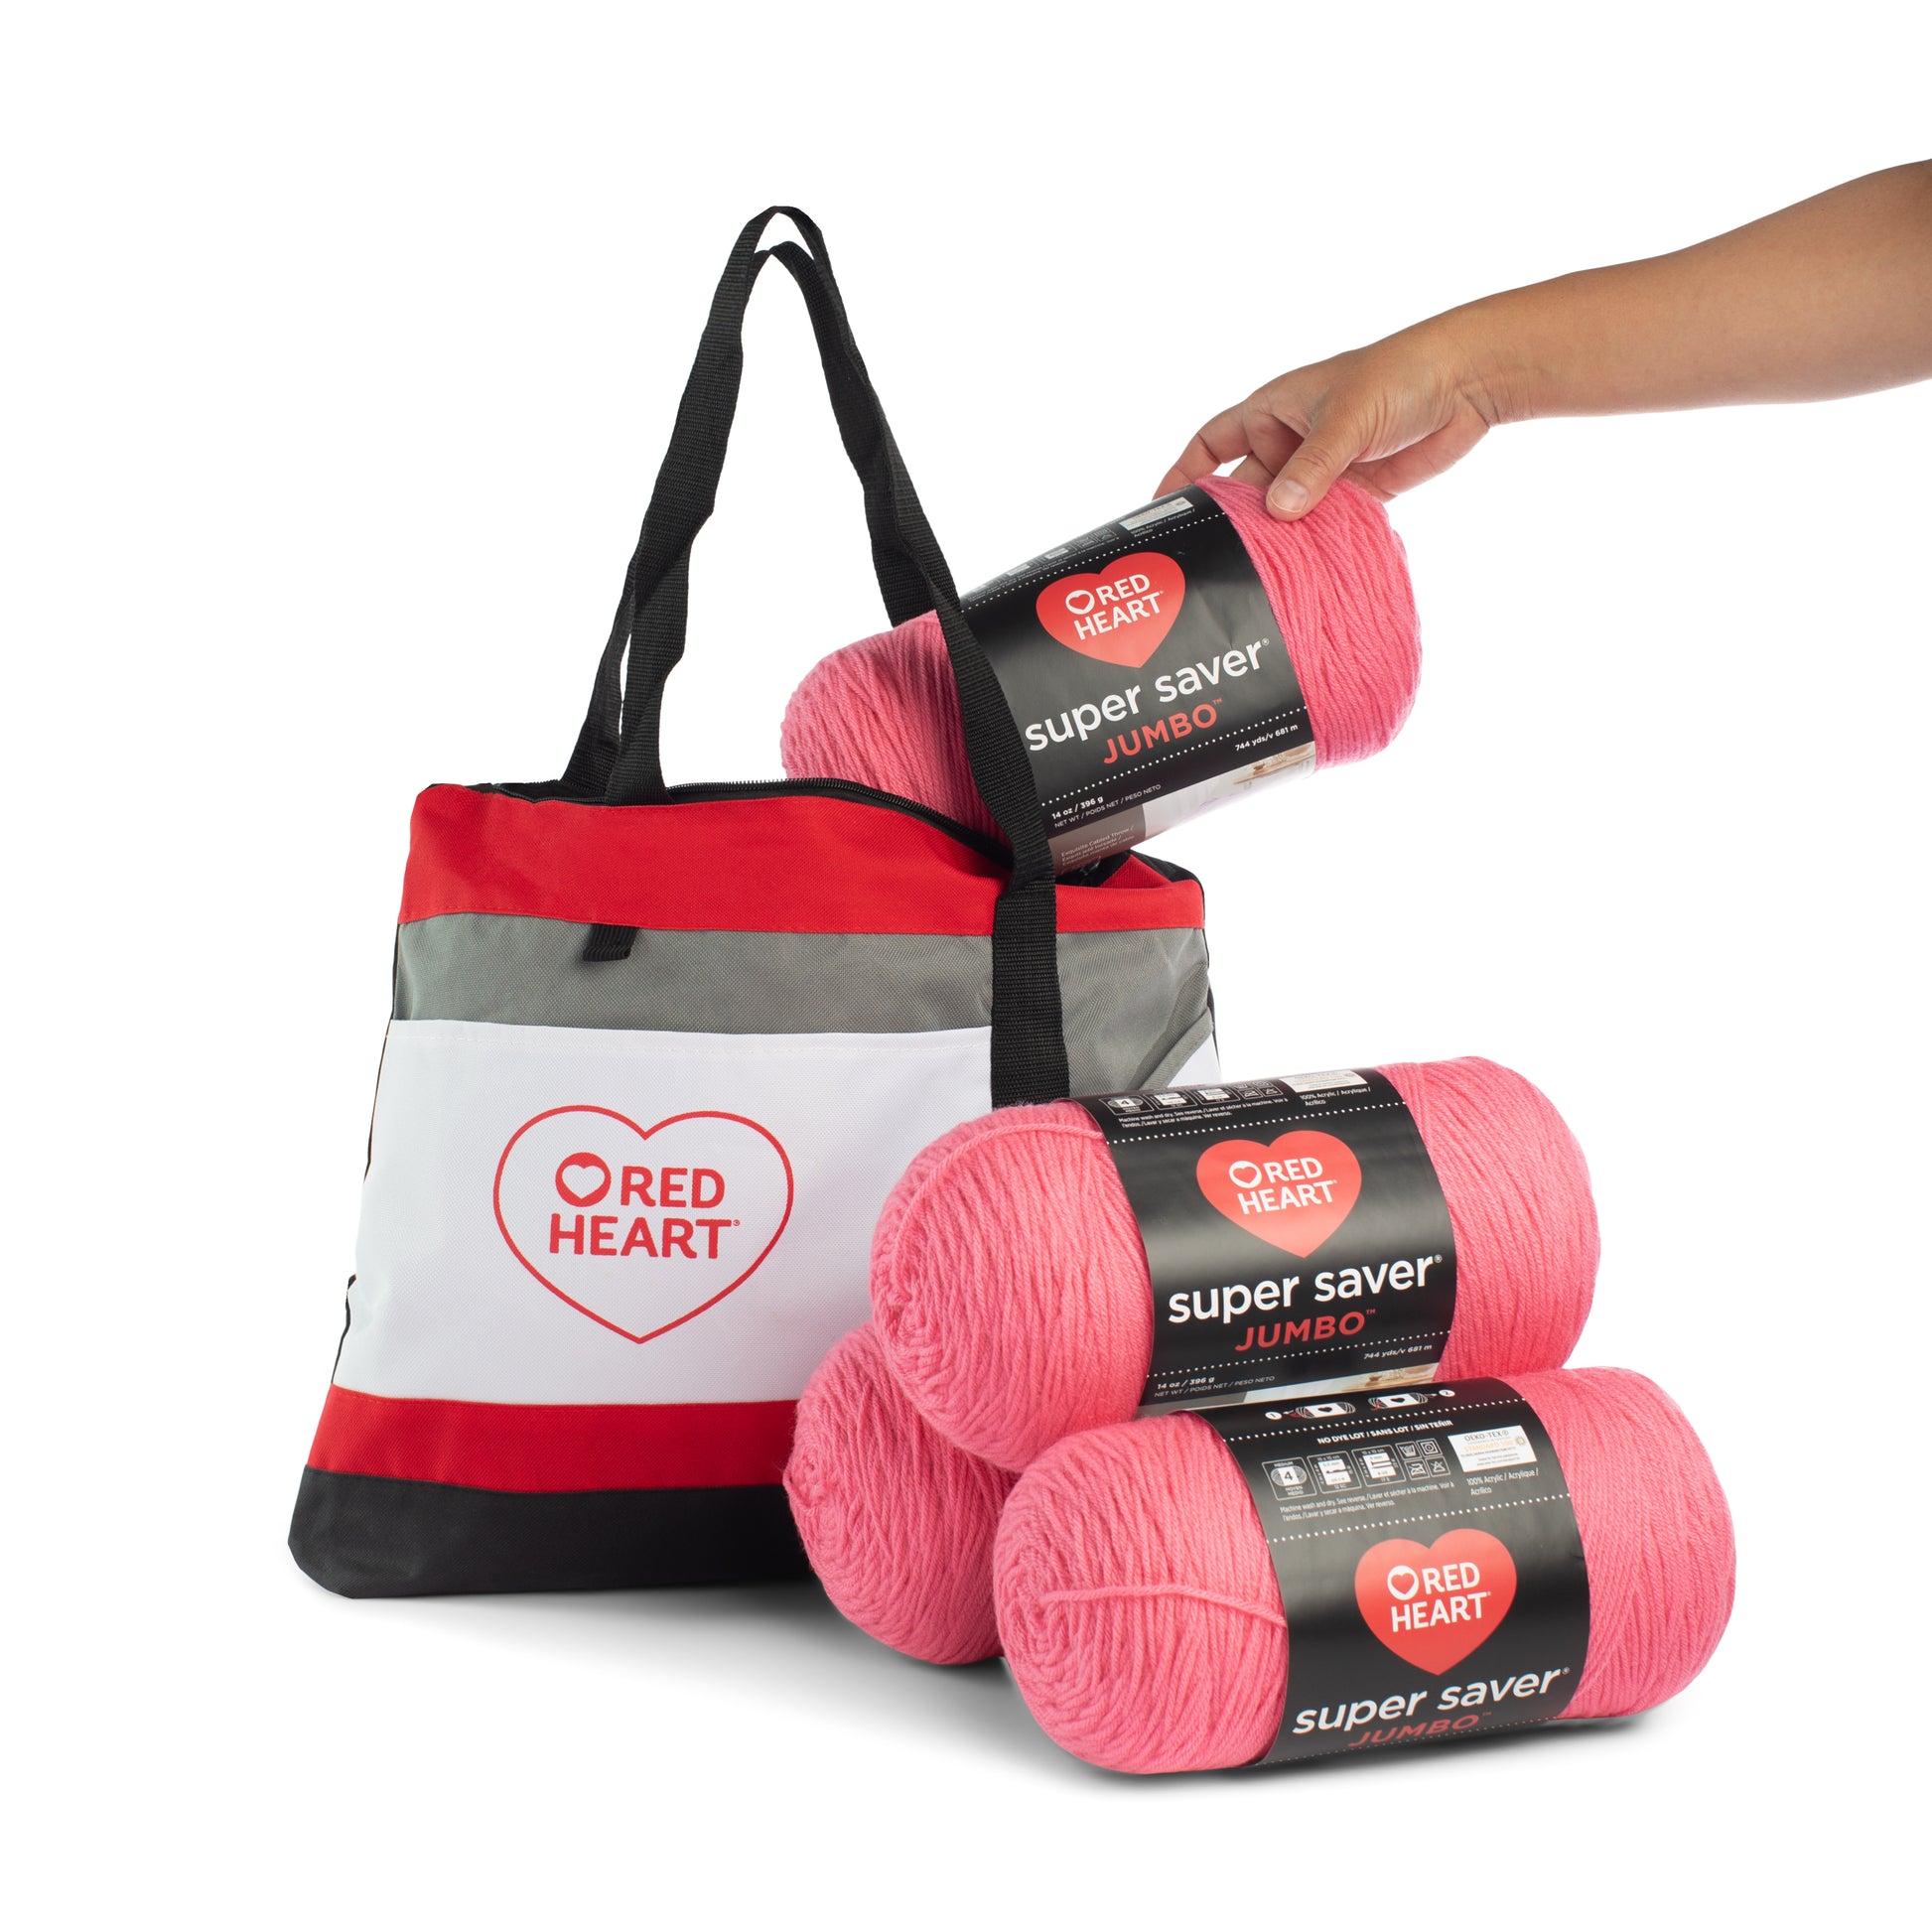 Red Heart Super Saver Jumbo Value Pack with Tote bag - Clearance item